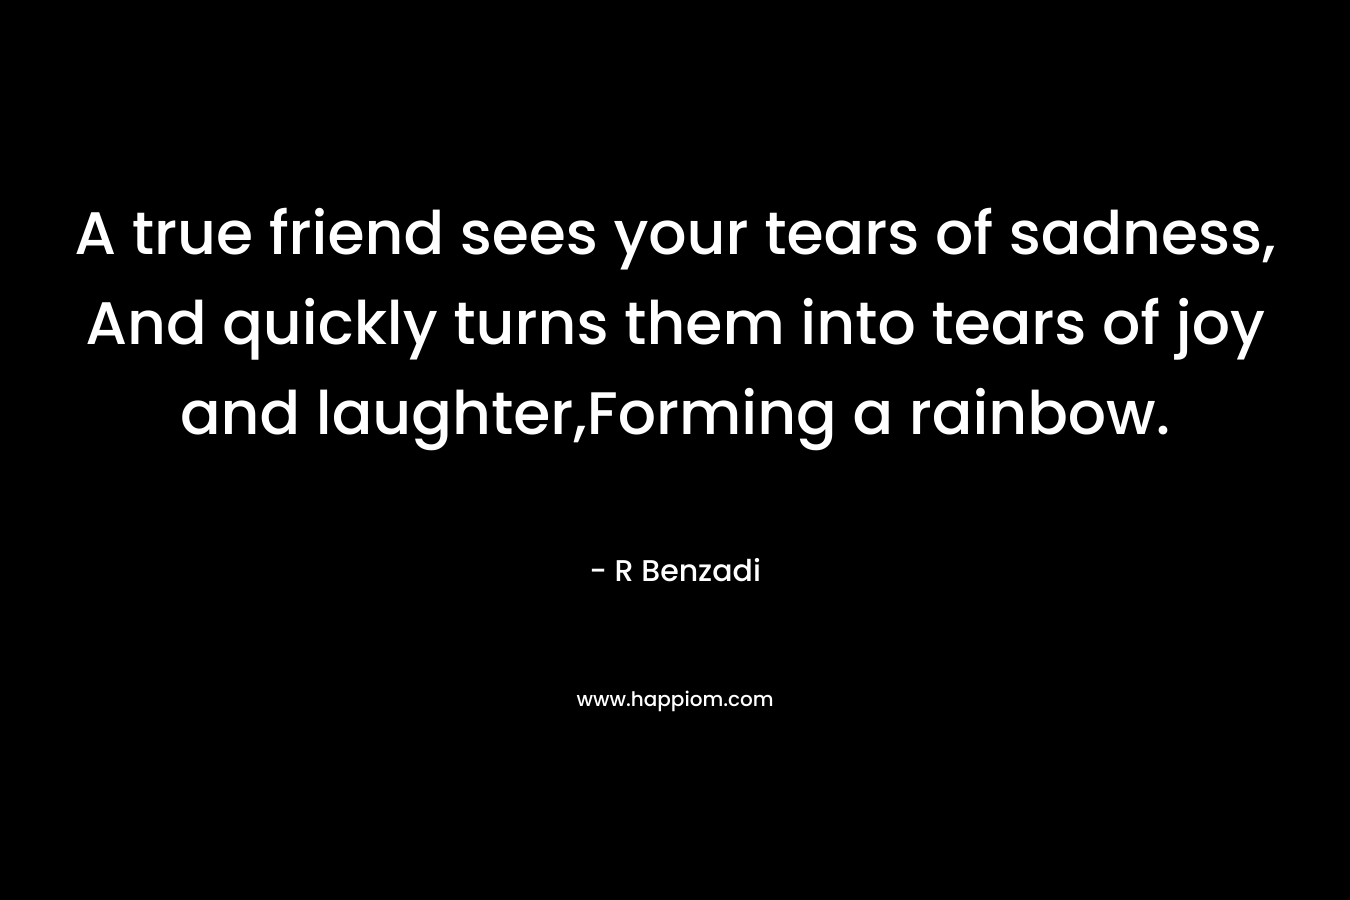 A true friend sees your tears of sadness, And quickly turns them into tears of joy and laughter,Forming a rainbow.